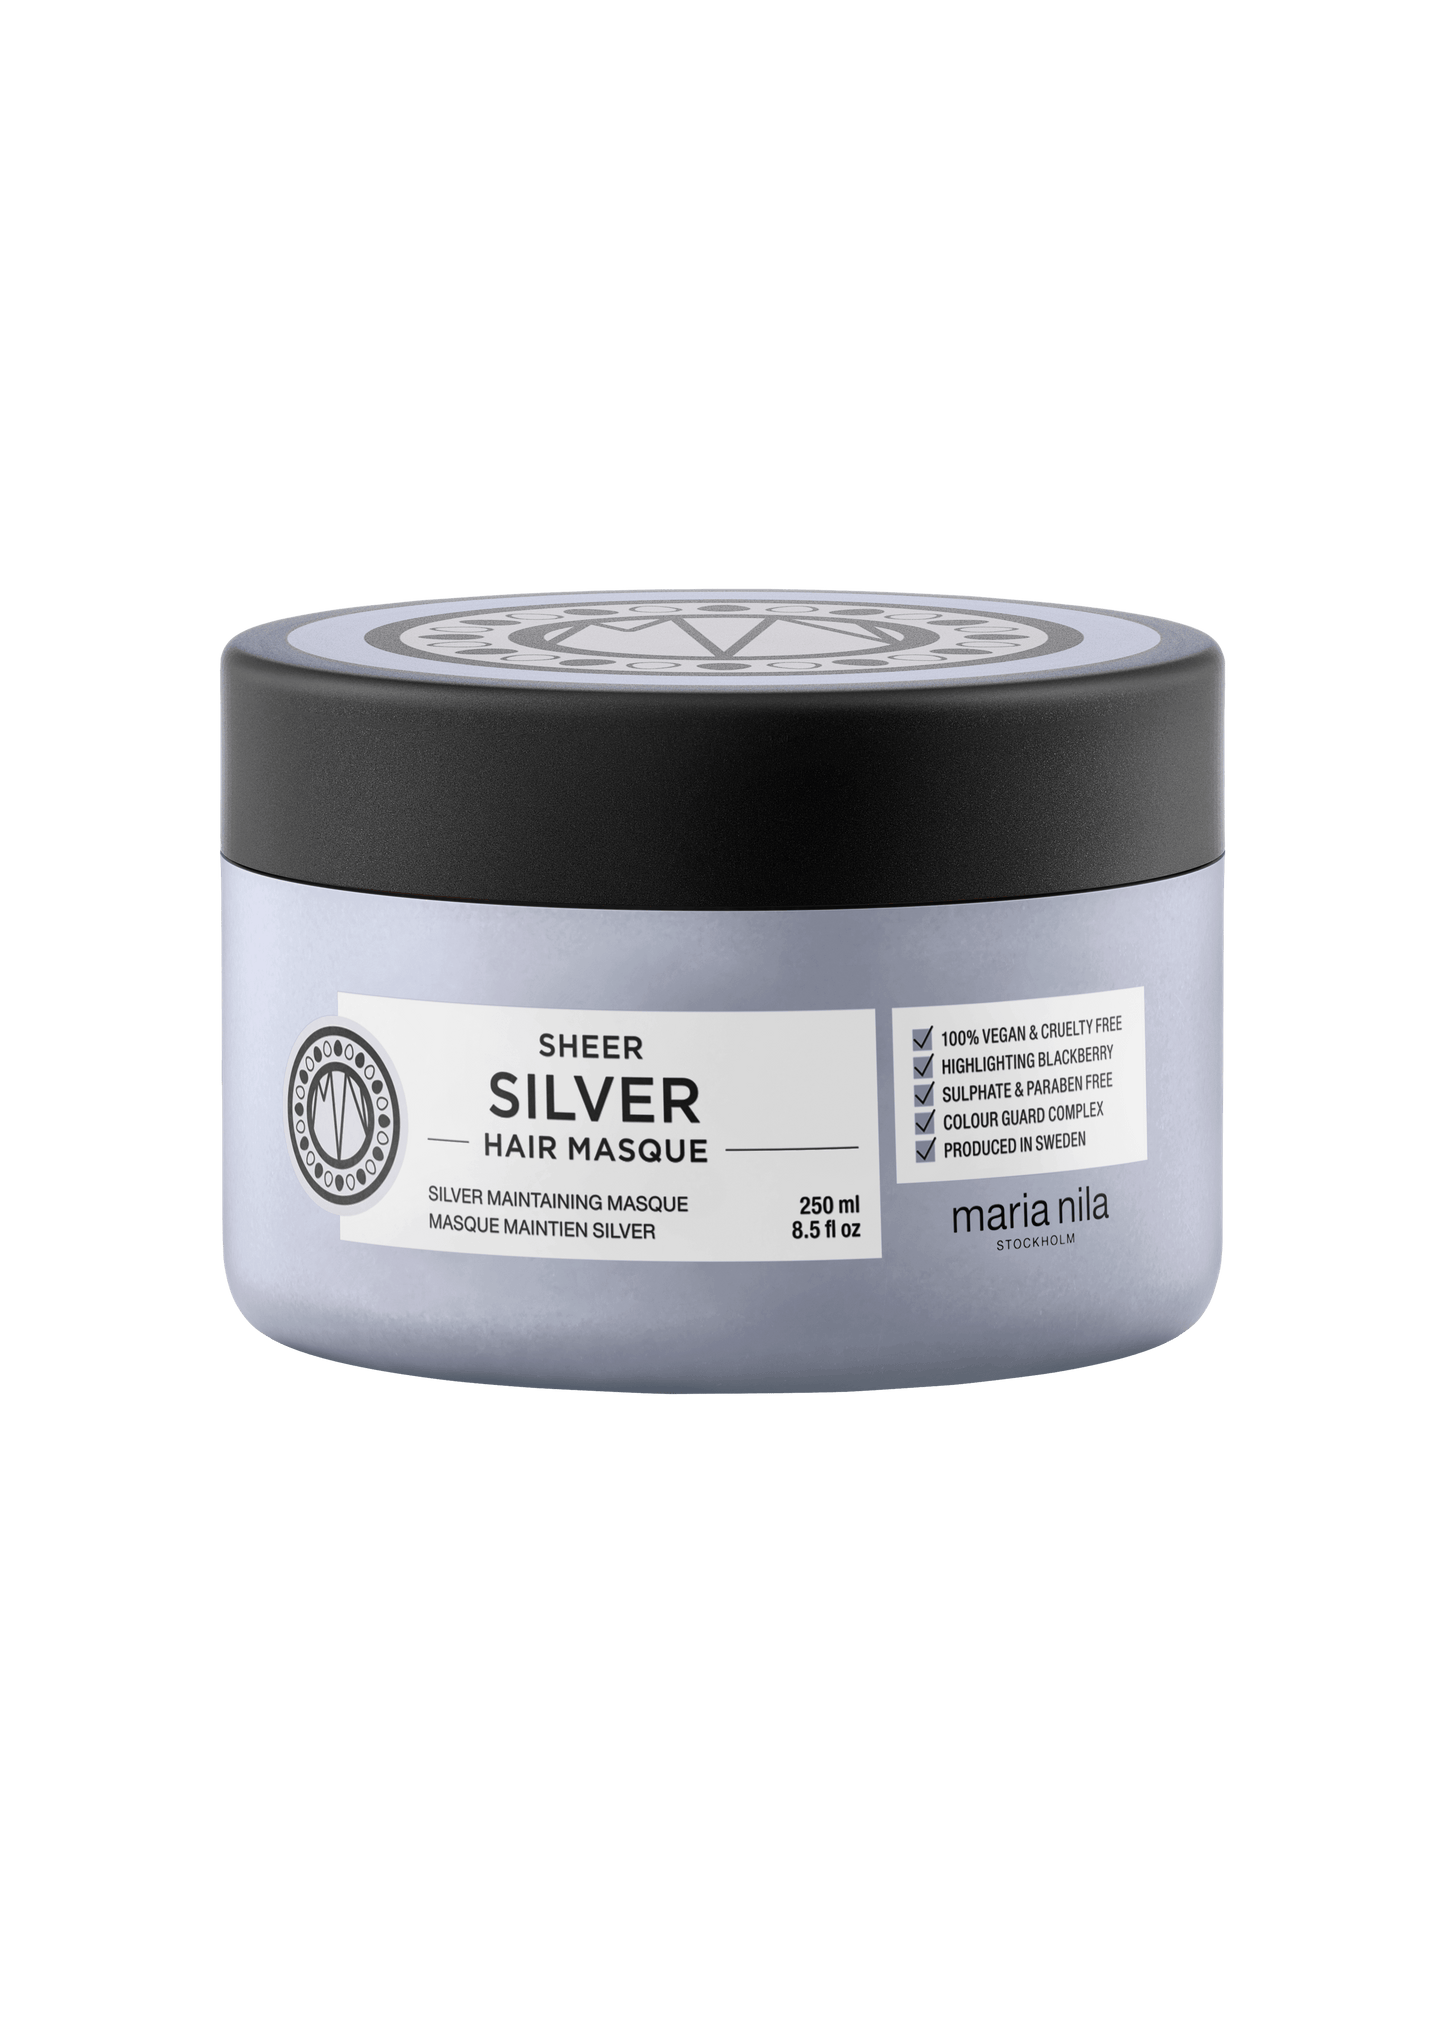 Sheer Silver Masque - The Coloroom 